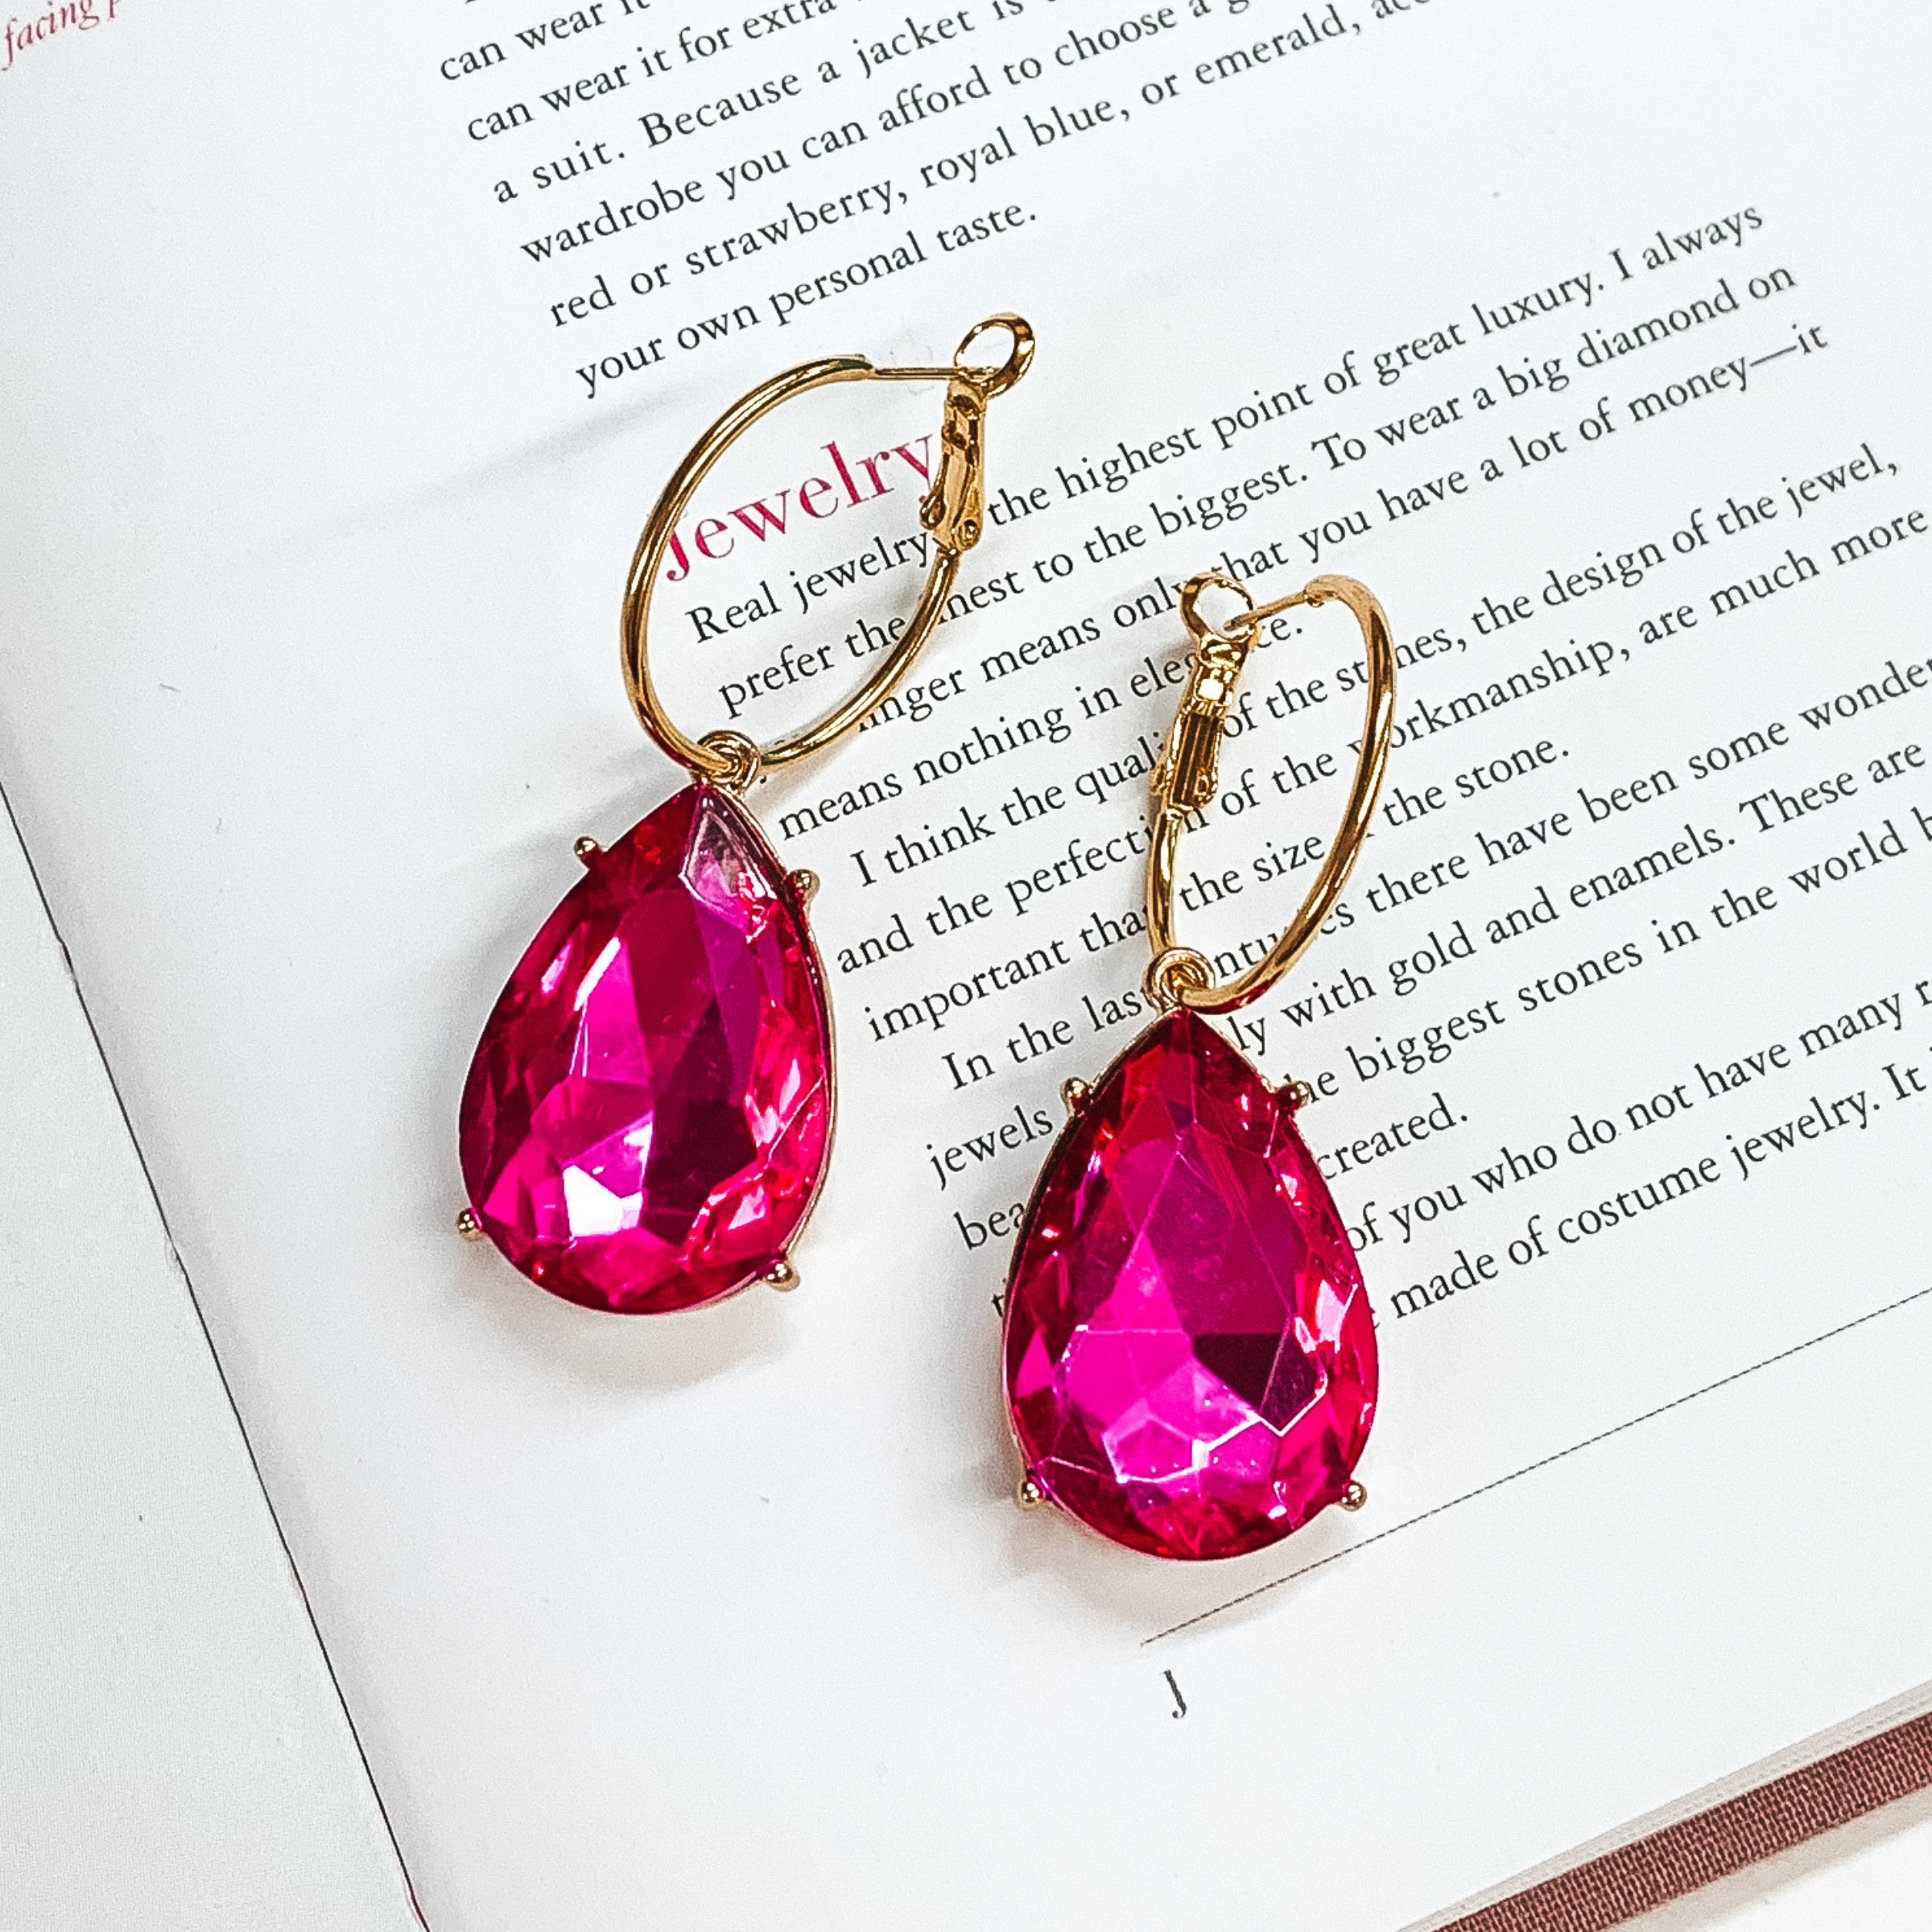 A pair of gold hoop earrings with fuchsia teardrop crystals. These earrings are pictured on an open book.